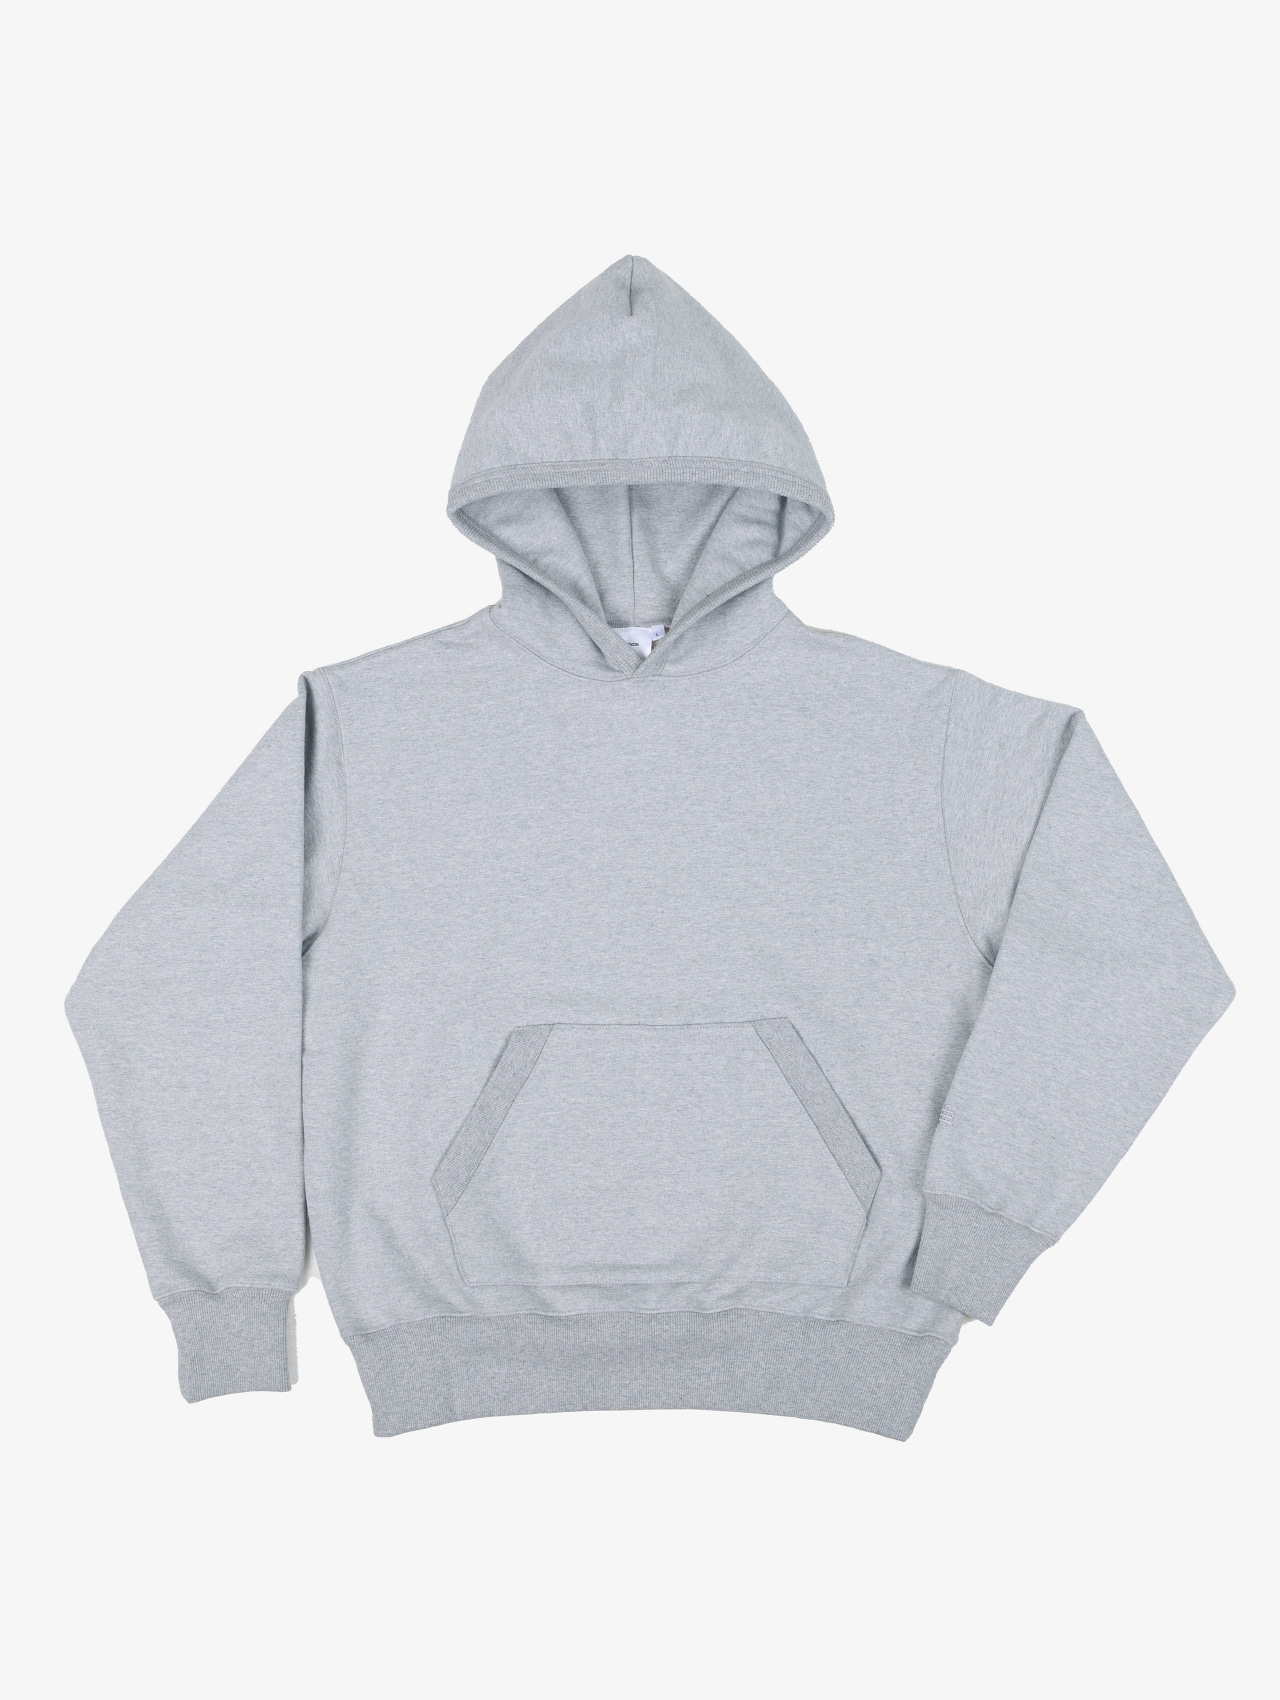 3.52 POUNDS GREY HOODIE